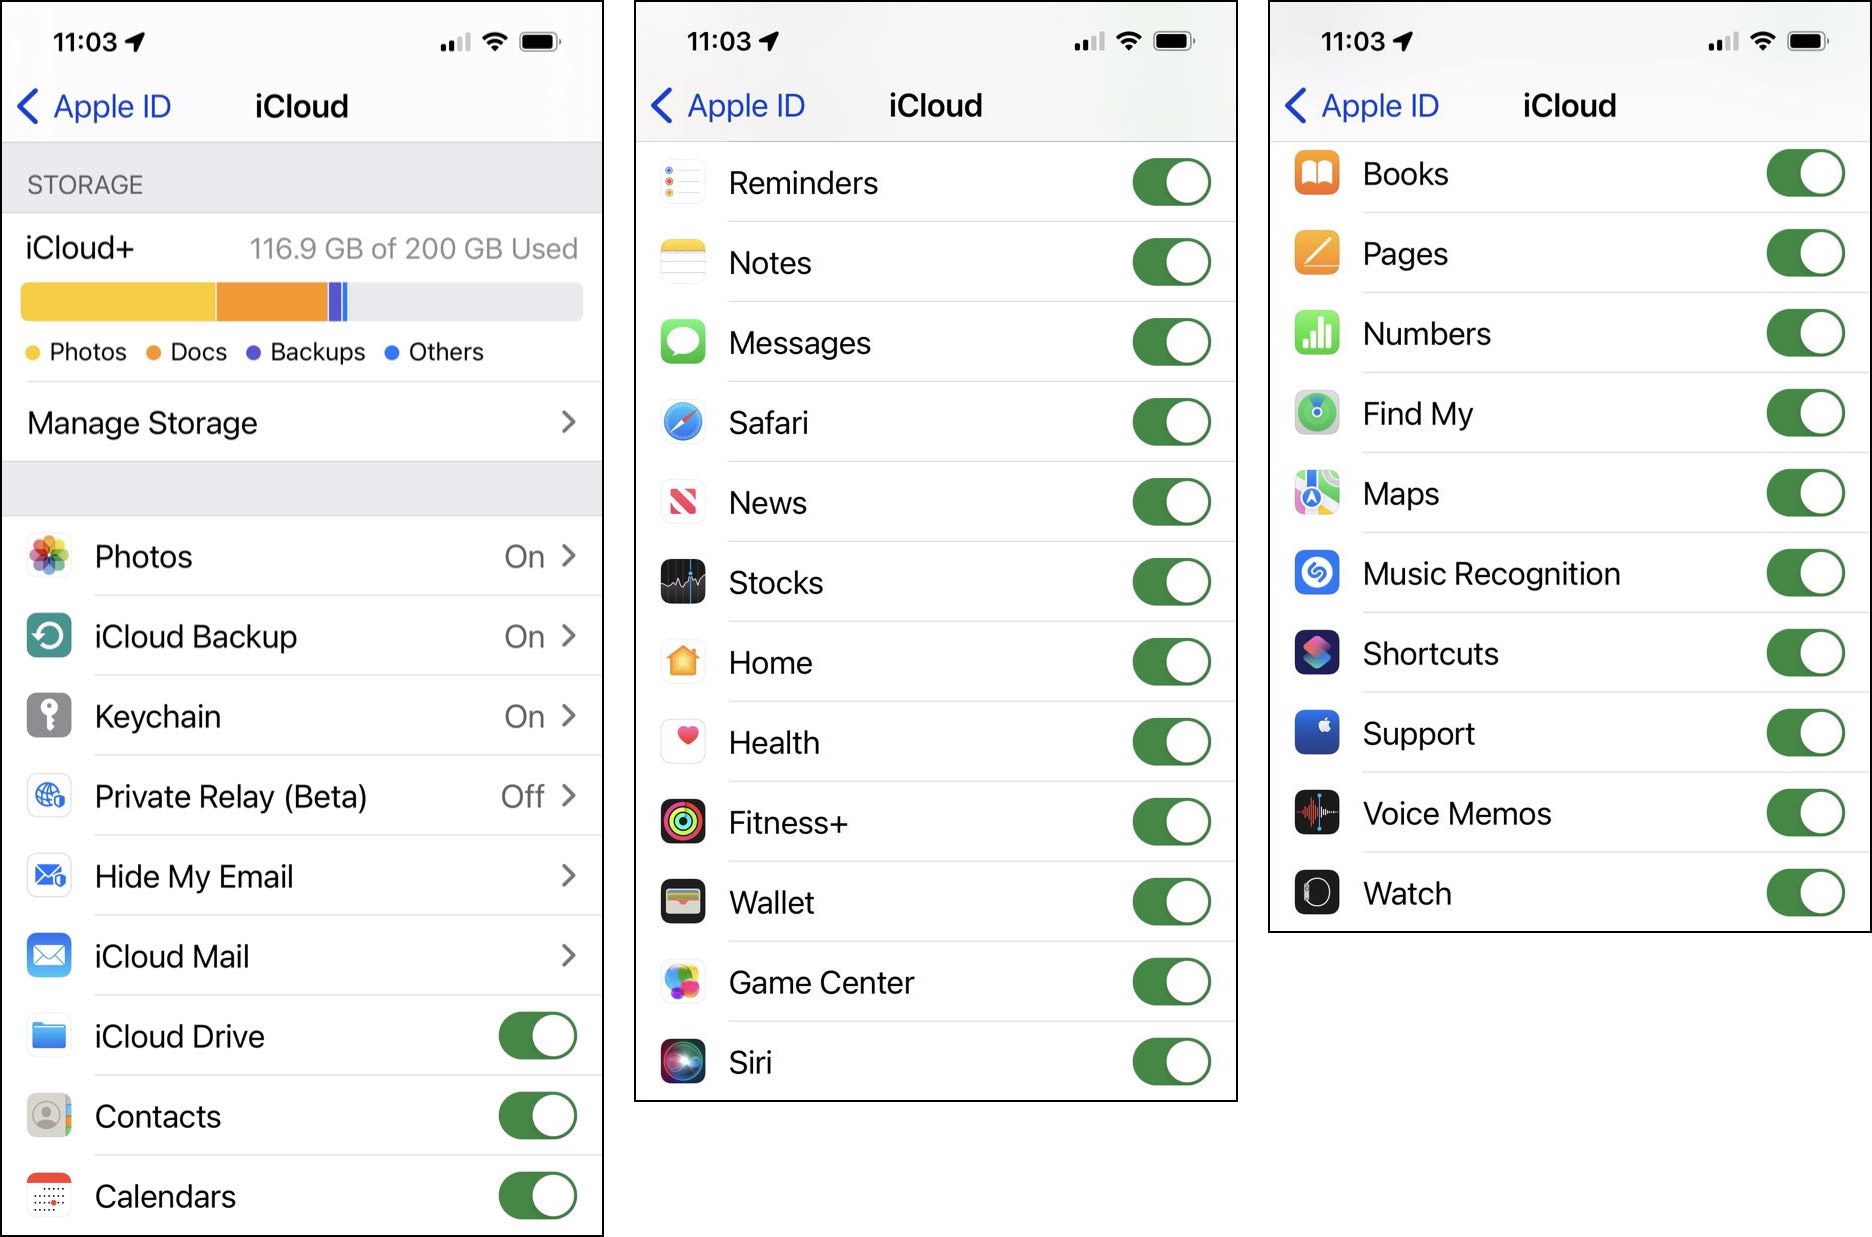 How To Setup iCloud Email On iPhone 